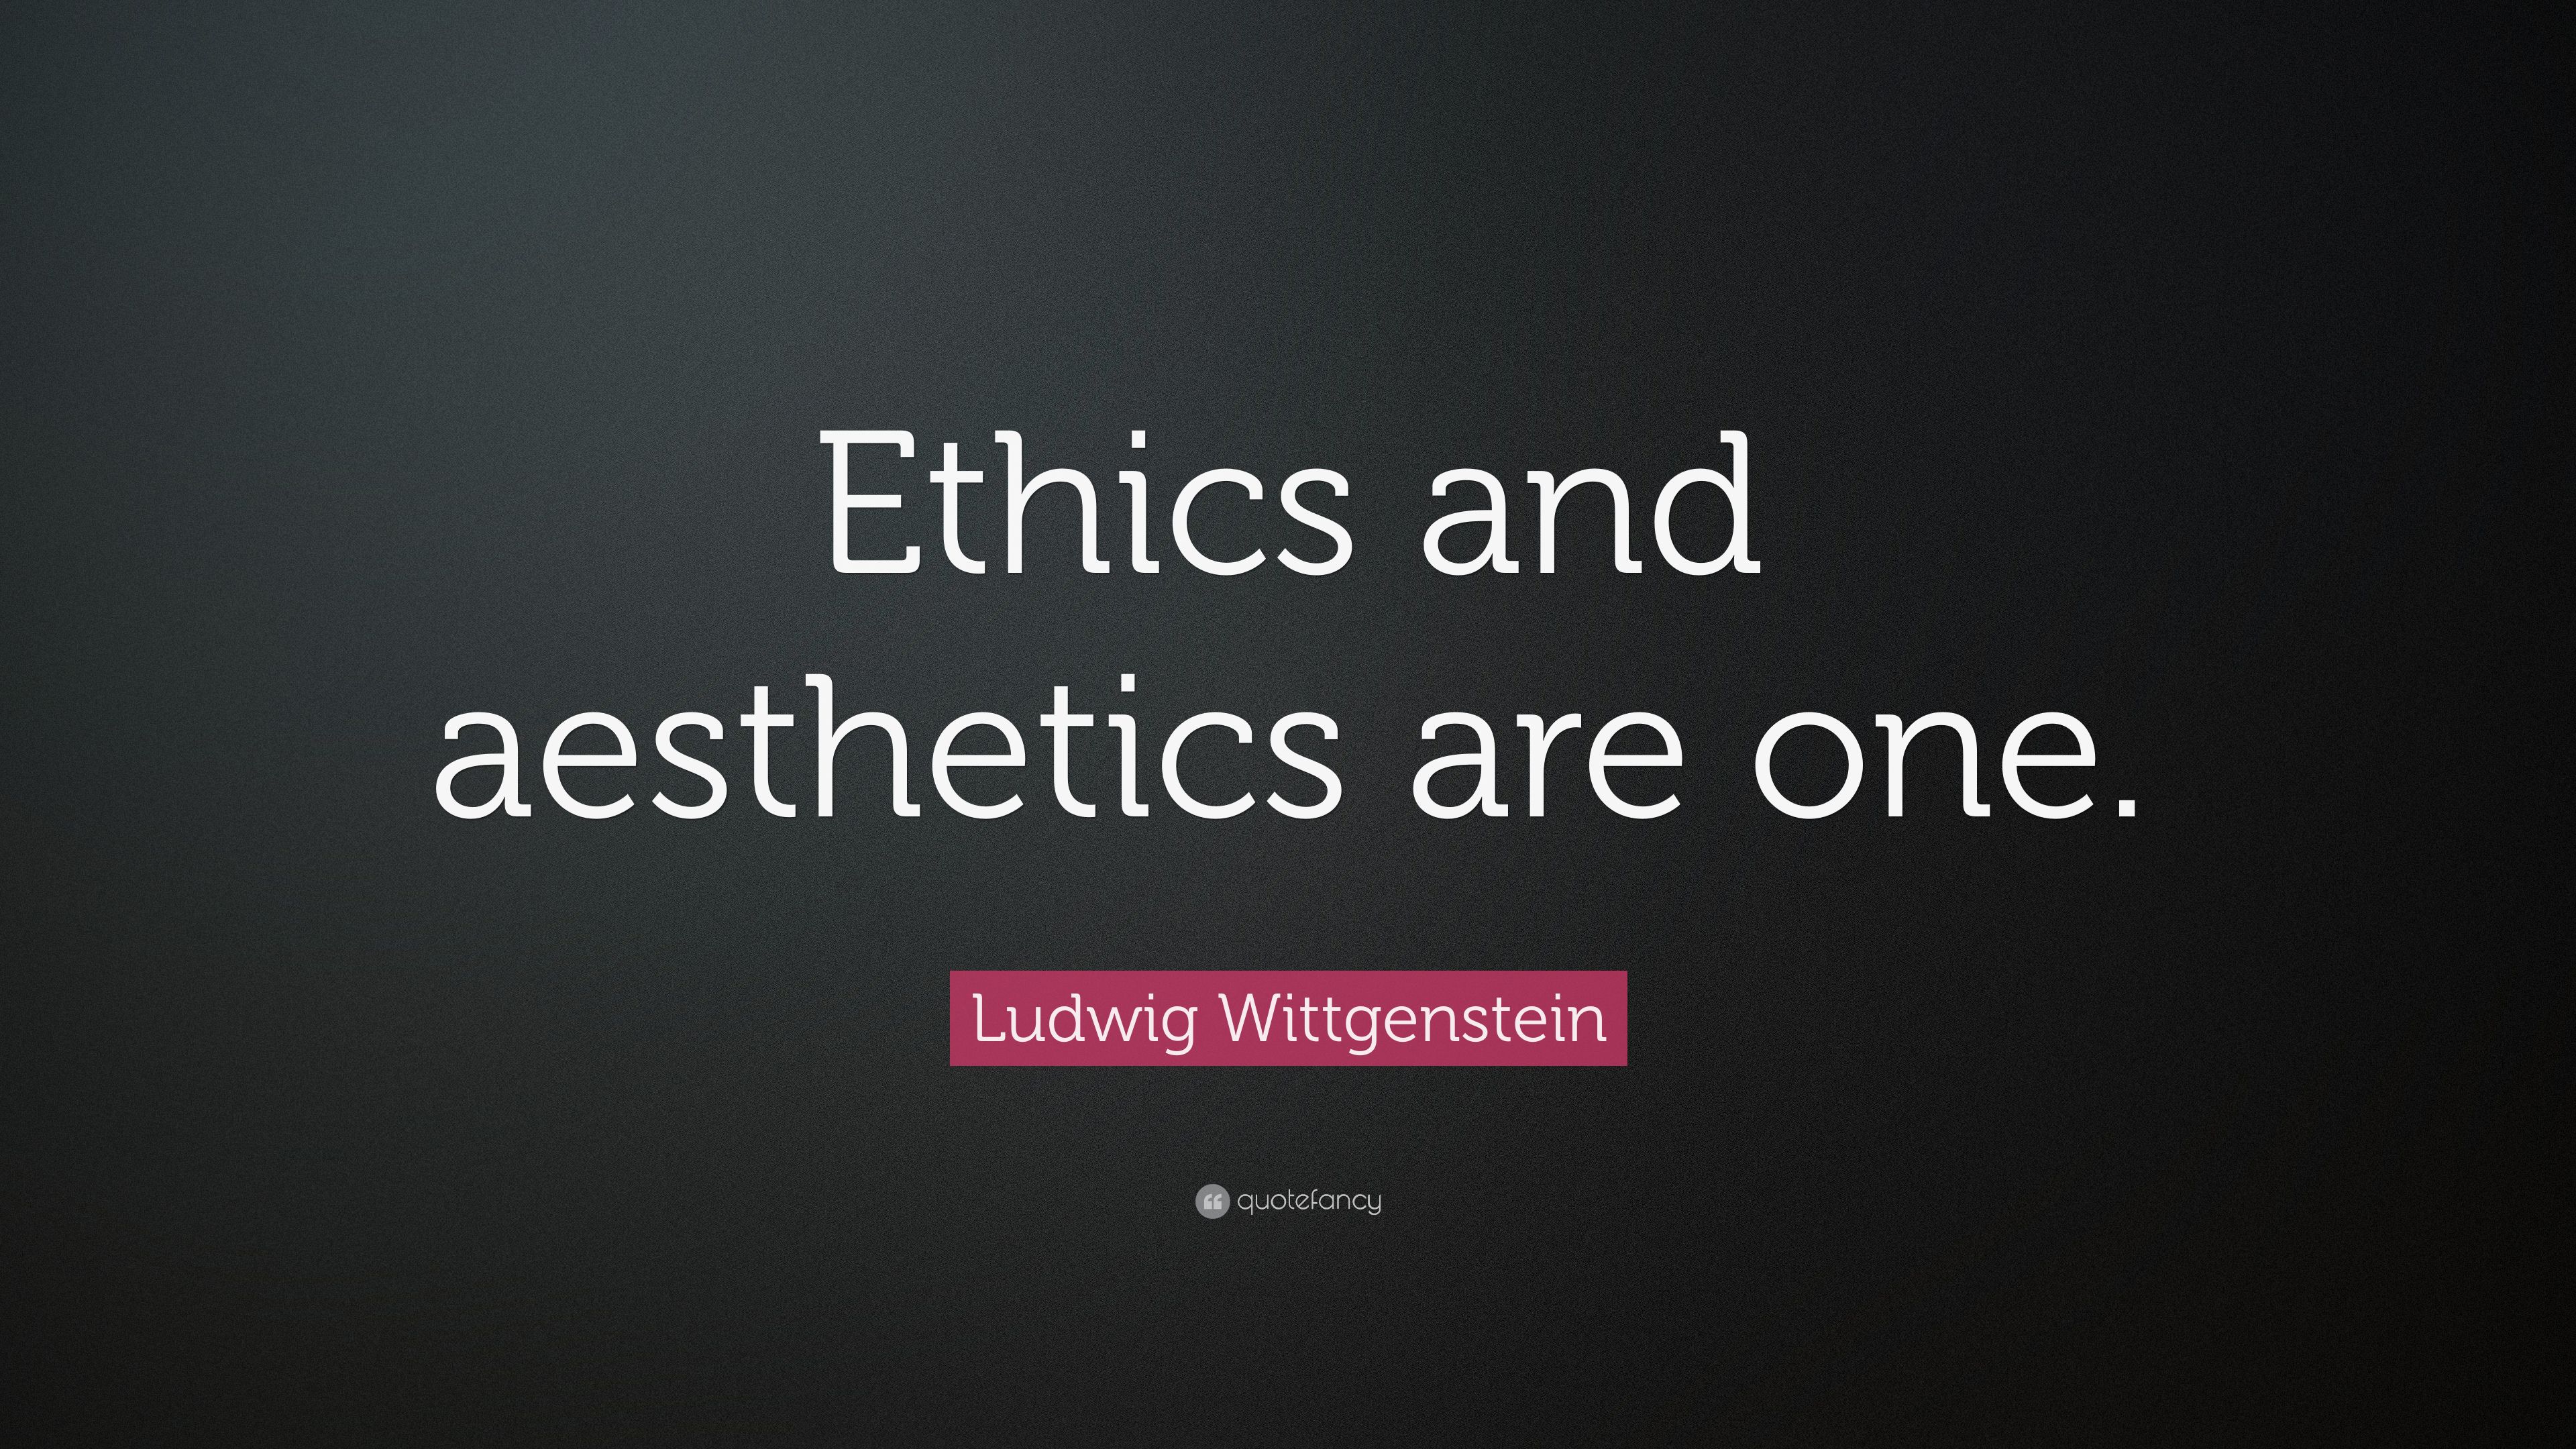 Ludwig Wittgenstein Quote: “Ethics and .quotefancy.com